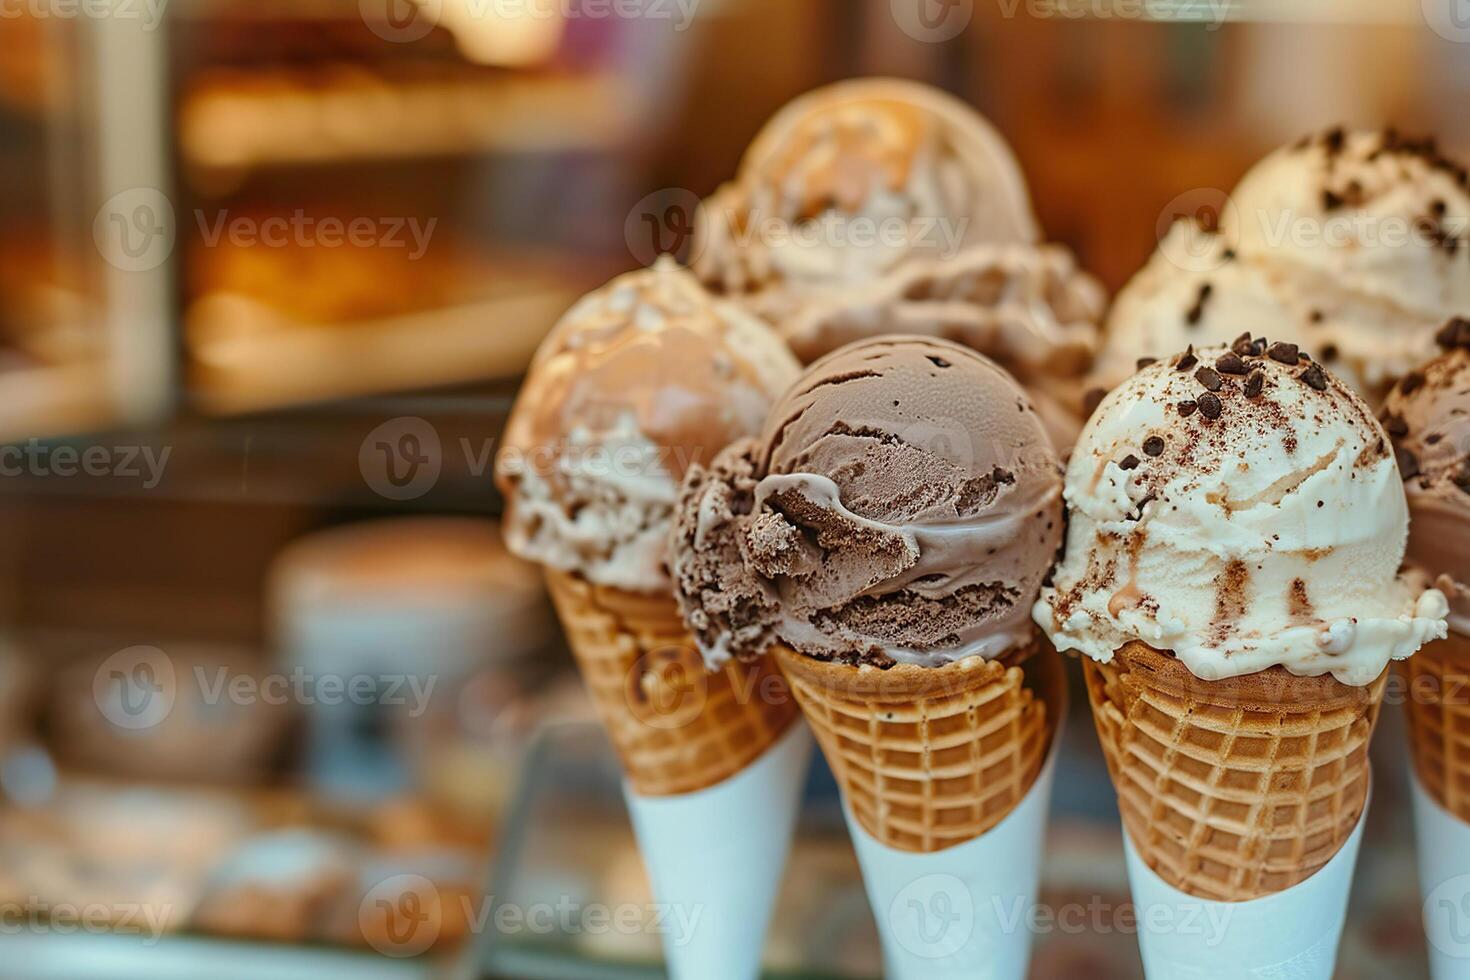 Artisan ice cream cones with toppings, variety of flavors, close up photo